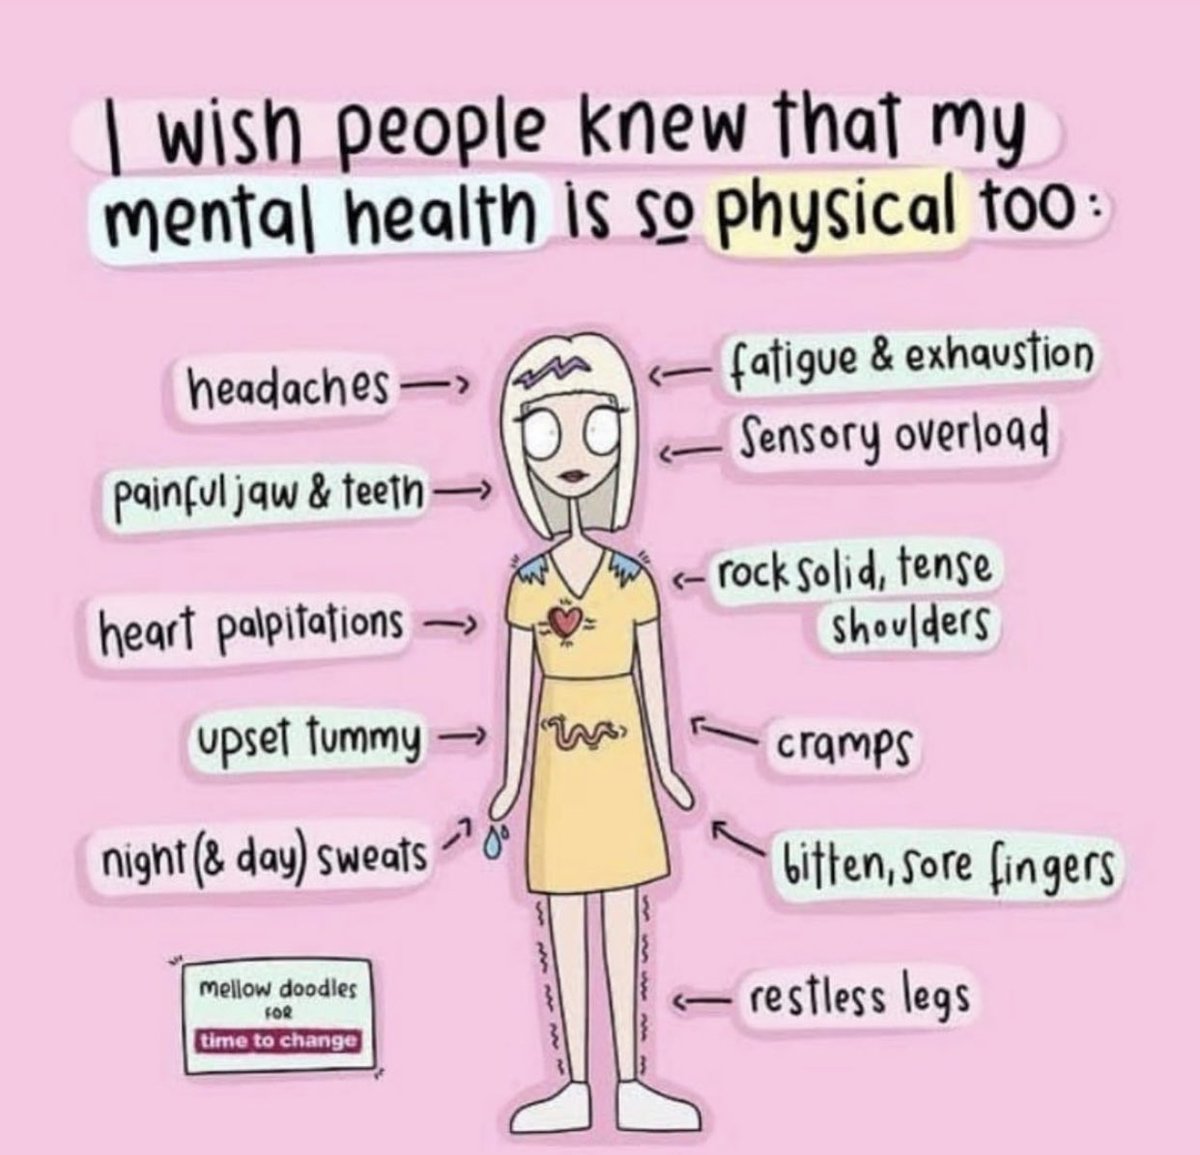 Mental health can be physical too #TexansRecoveringTogether #MentalHealthMatters #mentalhealth#physicalsymptoms